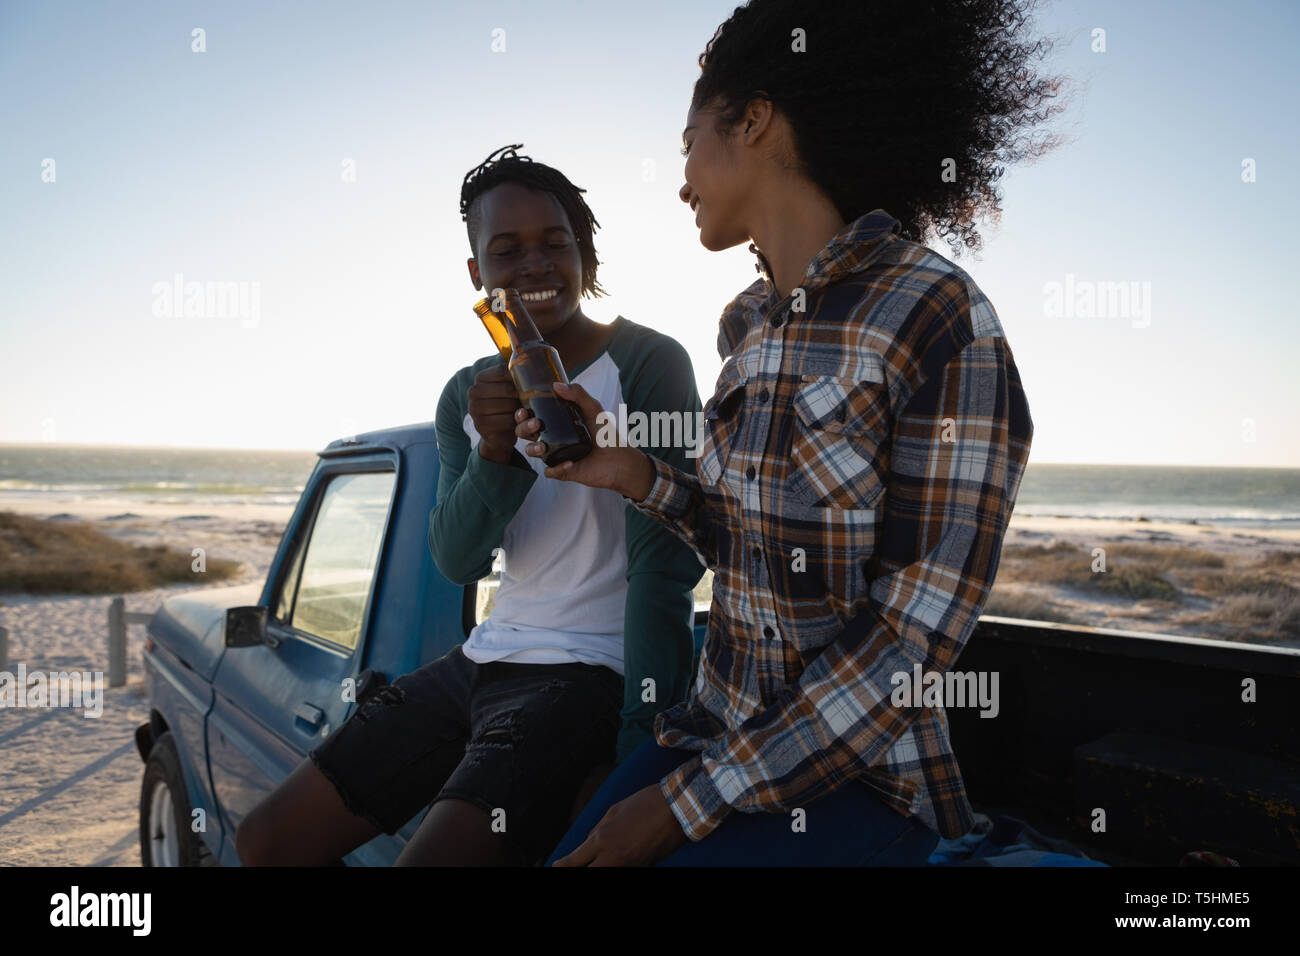 Couple toasting beer bottle in car at beach Stock Photo